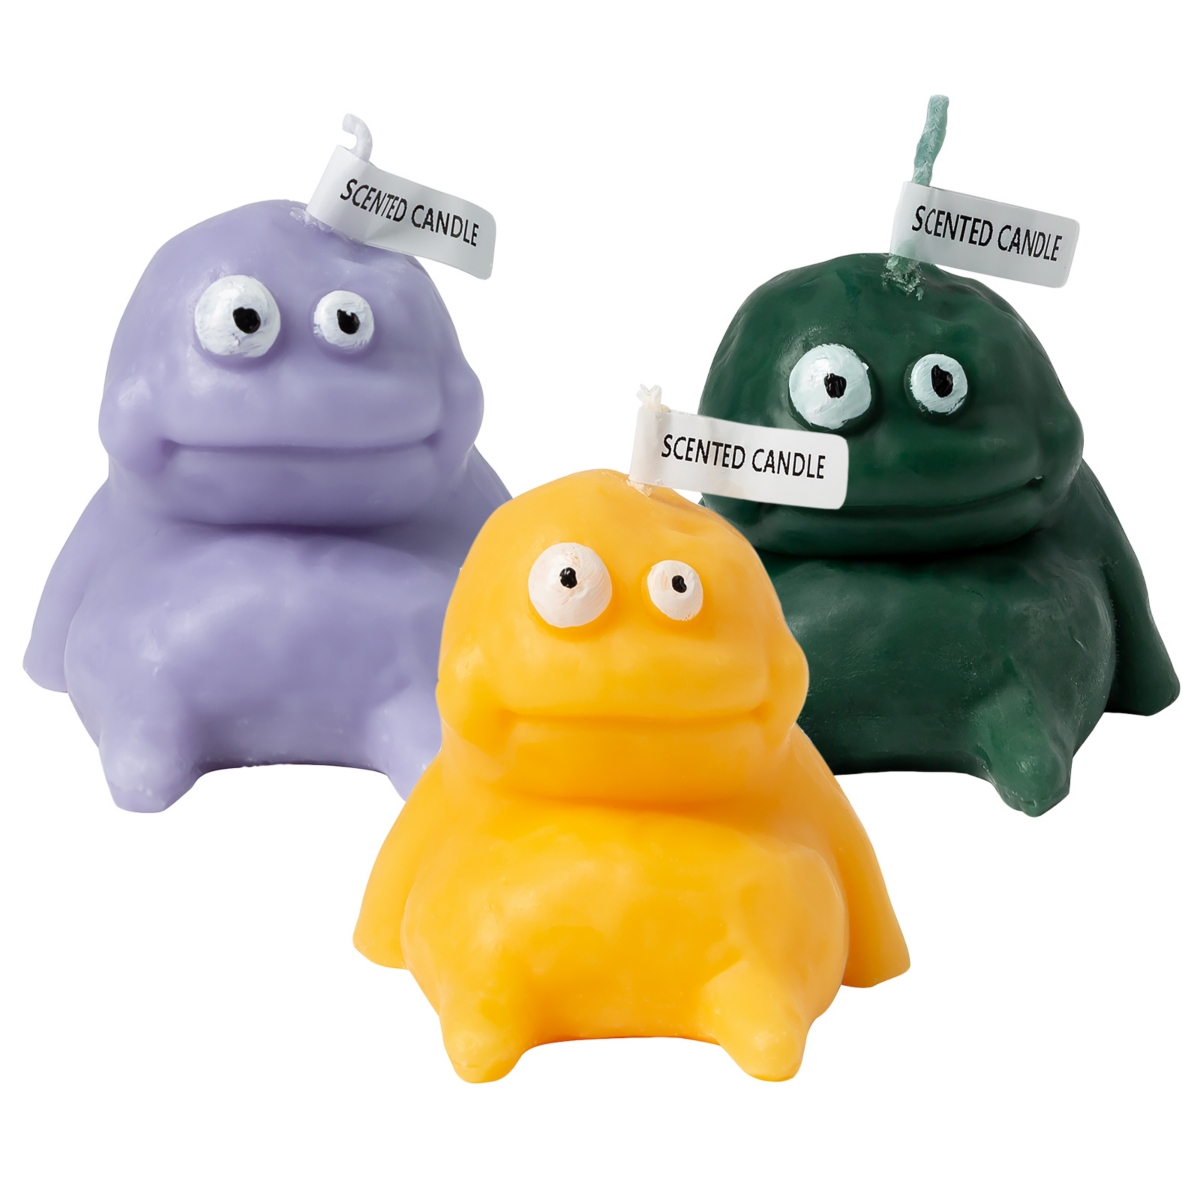 Mudman Shaped Scented Candle, 3.3" Fat Mud Monster Soy Wax Candle with Fragrance - Set of 3 - Purple/Yellow/Dark Green